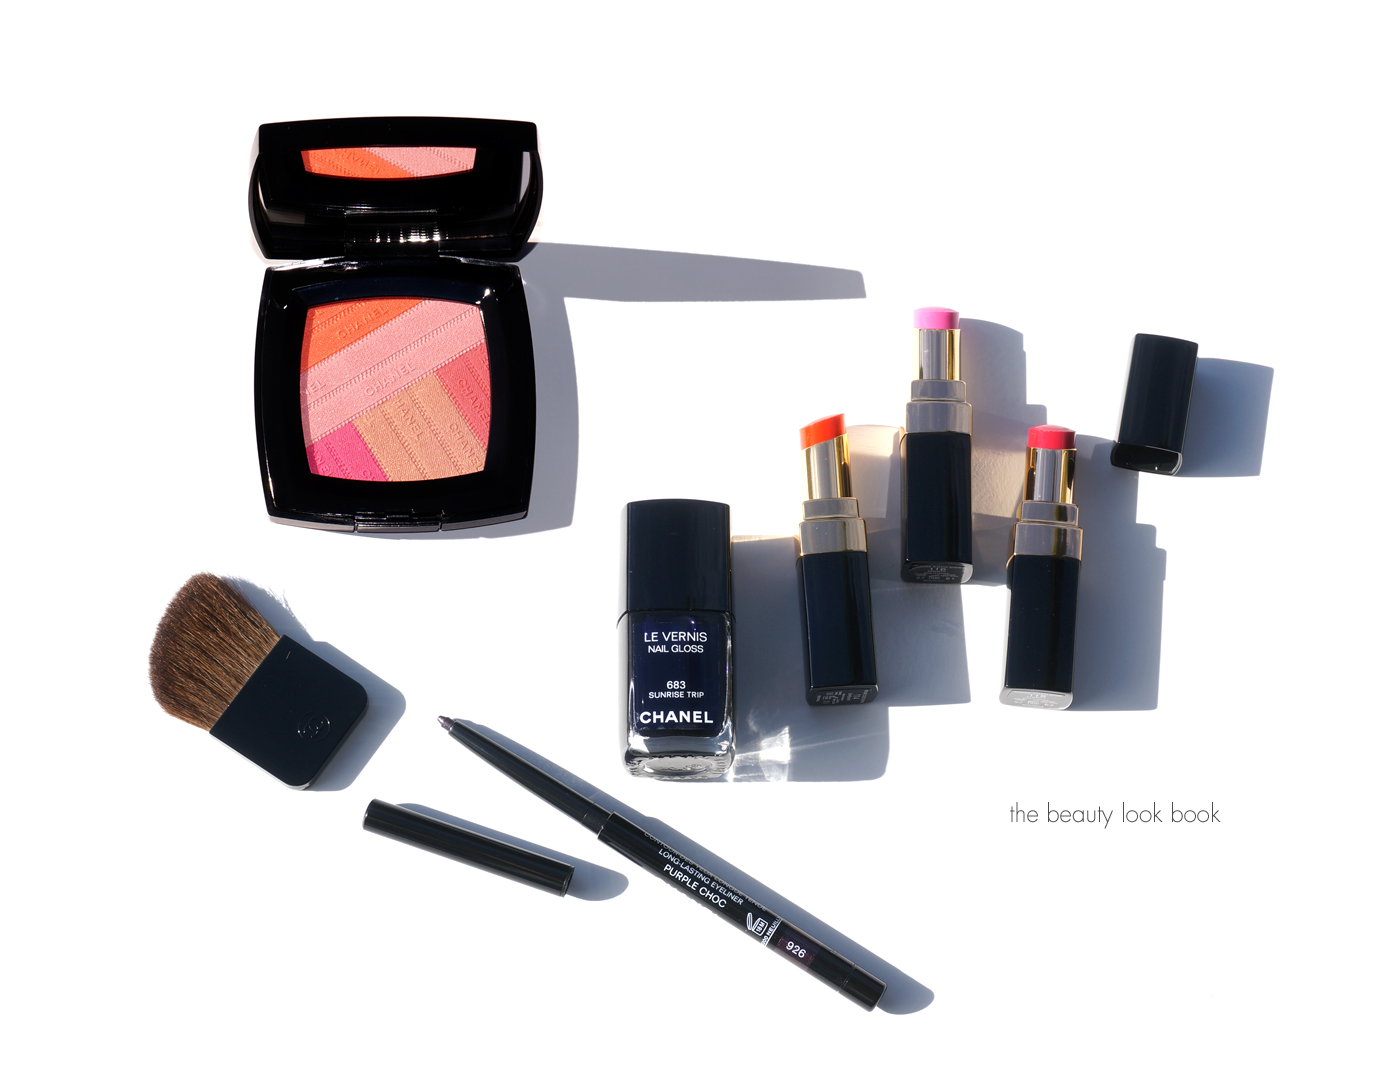 Chanel Collection L.A. Sunrise for Spring 2016 - The Beauty Look